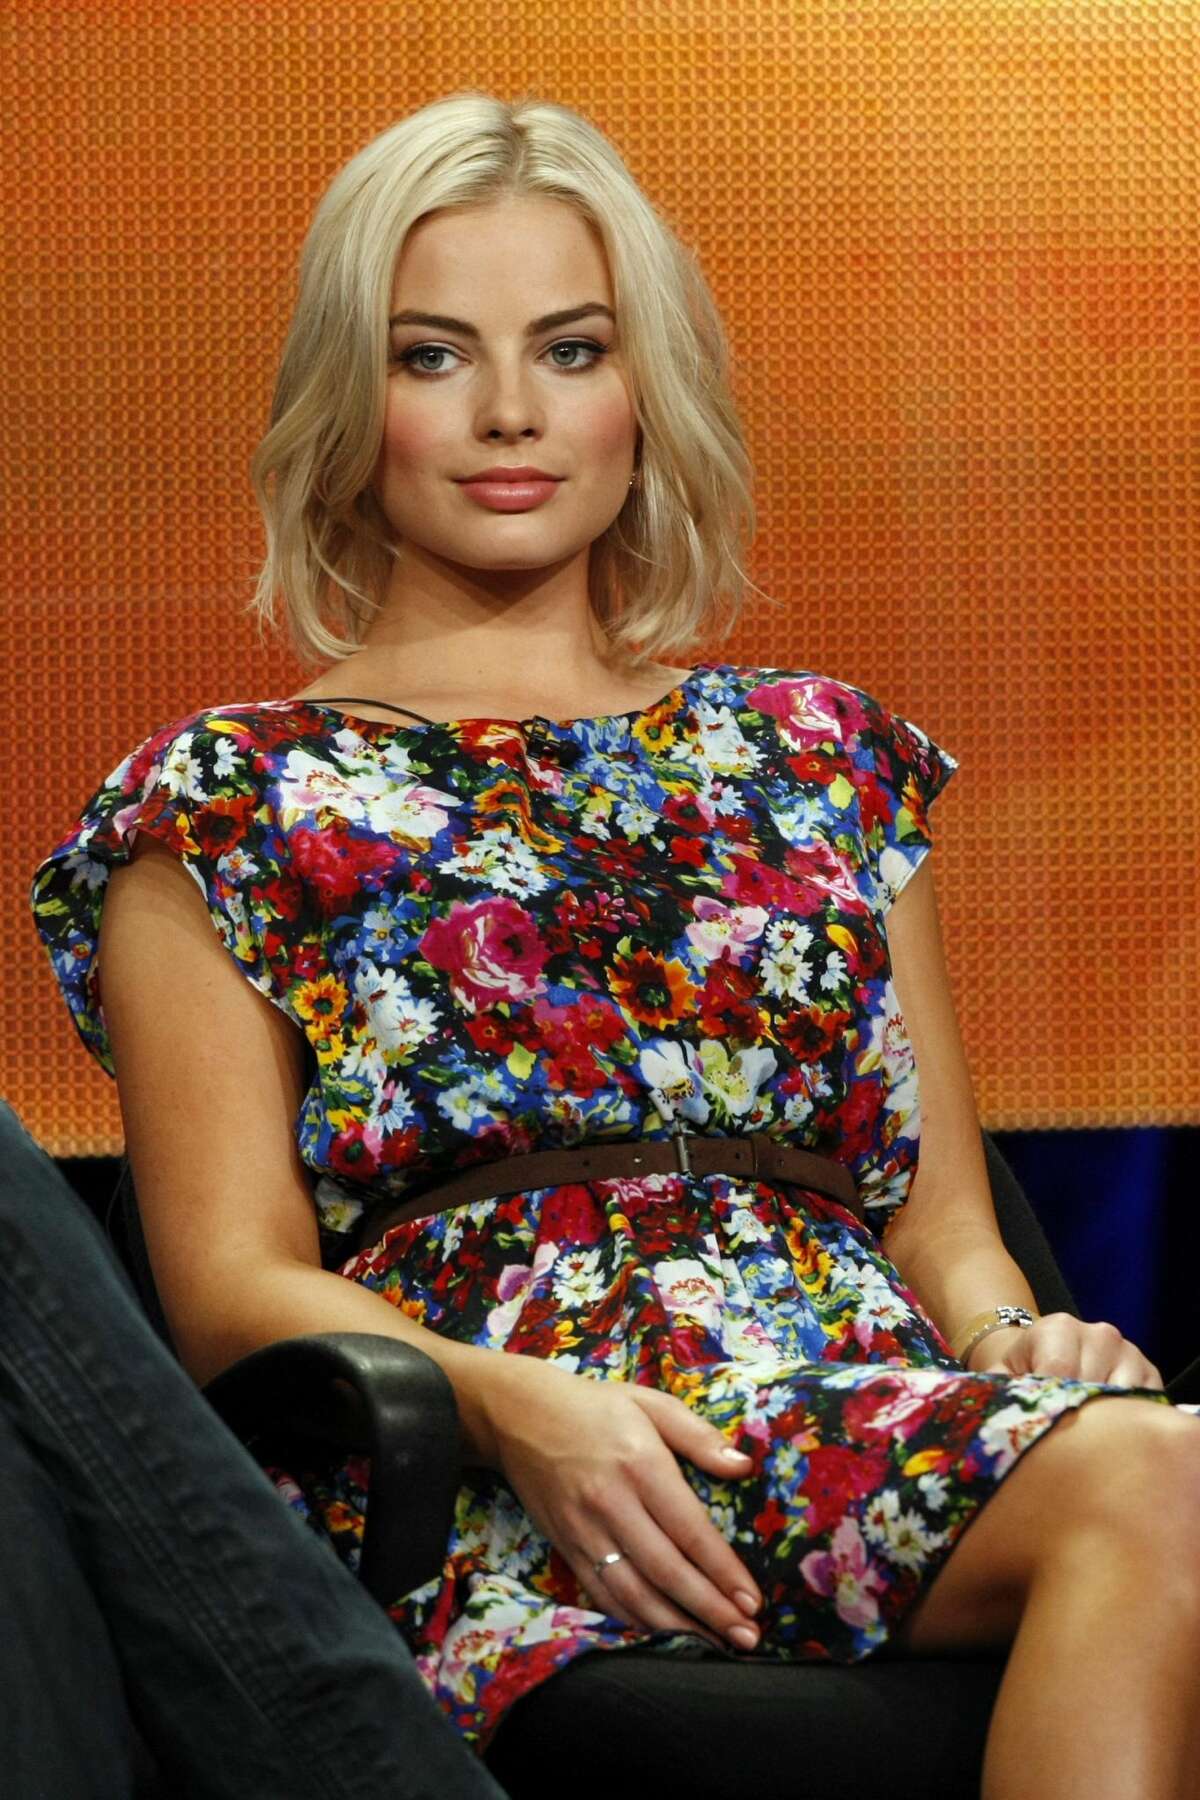 Margot Robbie: Born July 2, 1990 in Dalby, Australia. Photo caption: Robbie at the Disney/ABC Television Group 2011 Summer Press Tour at the Beverly Hills Hilton in Beverly Hills, Calif.